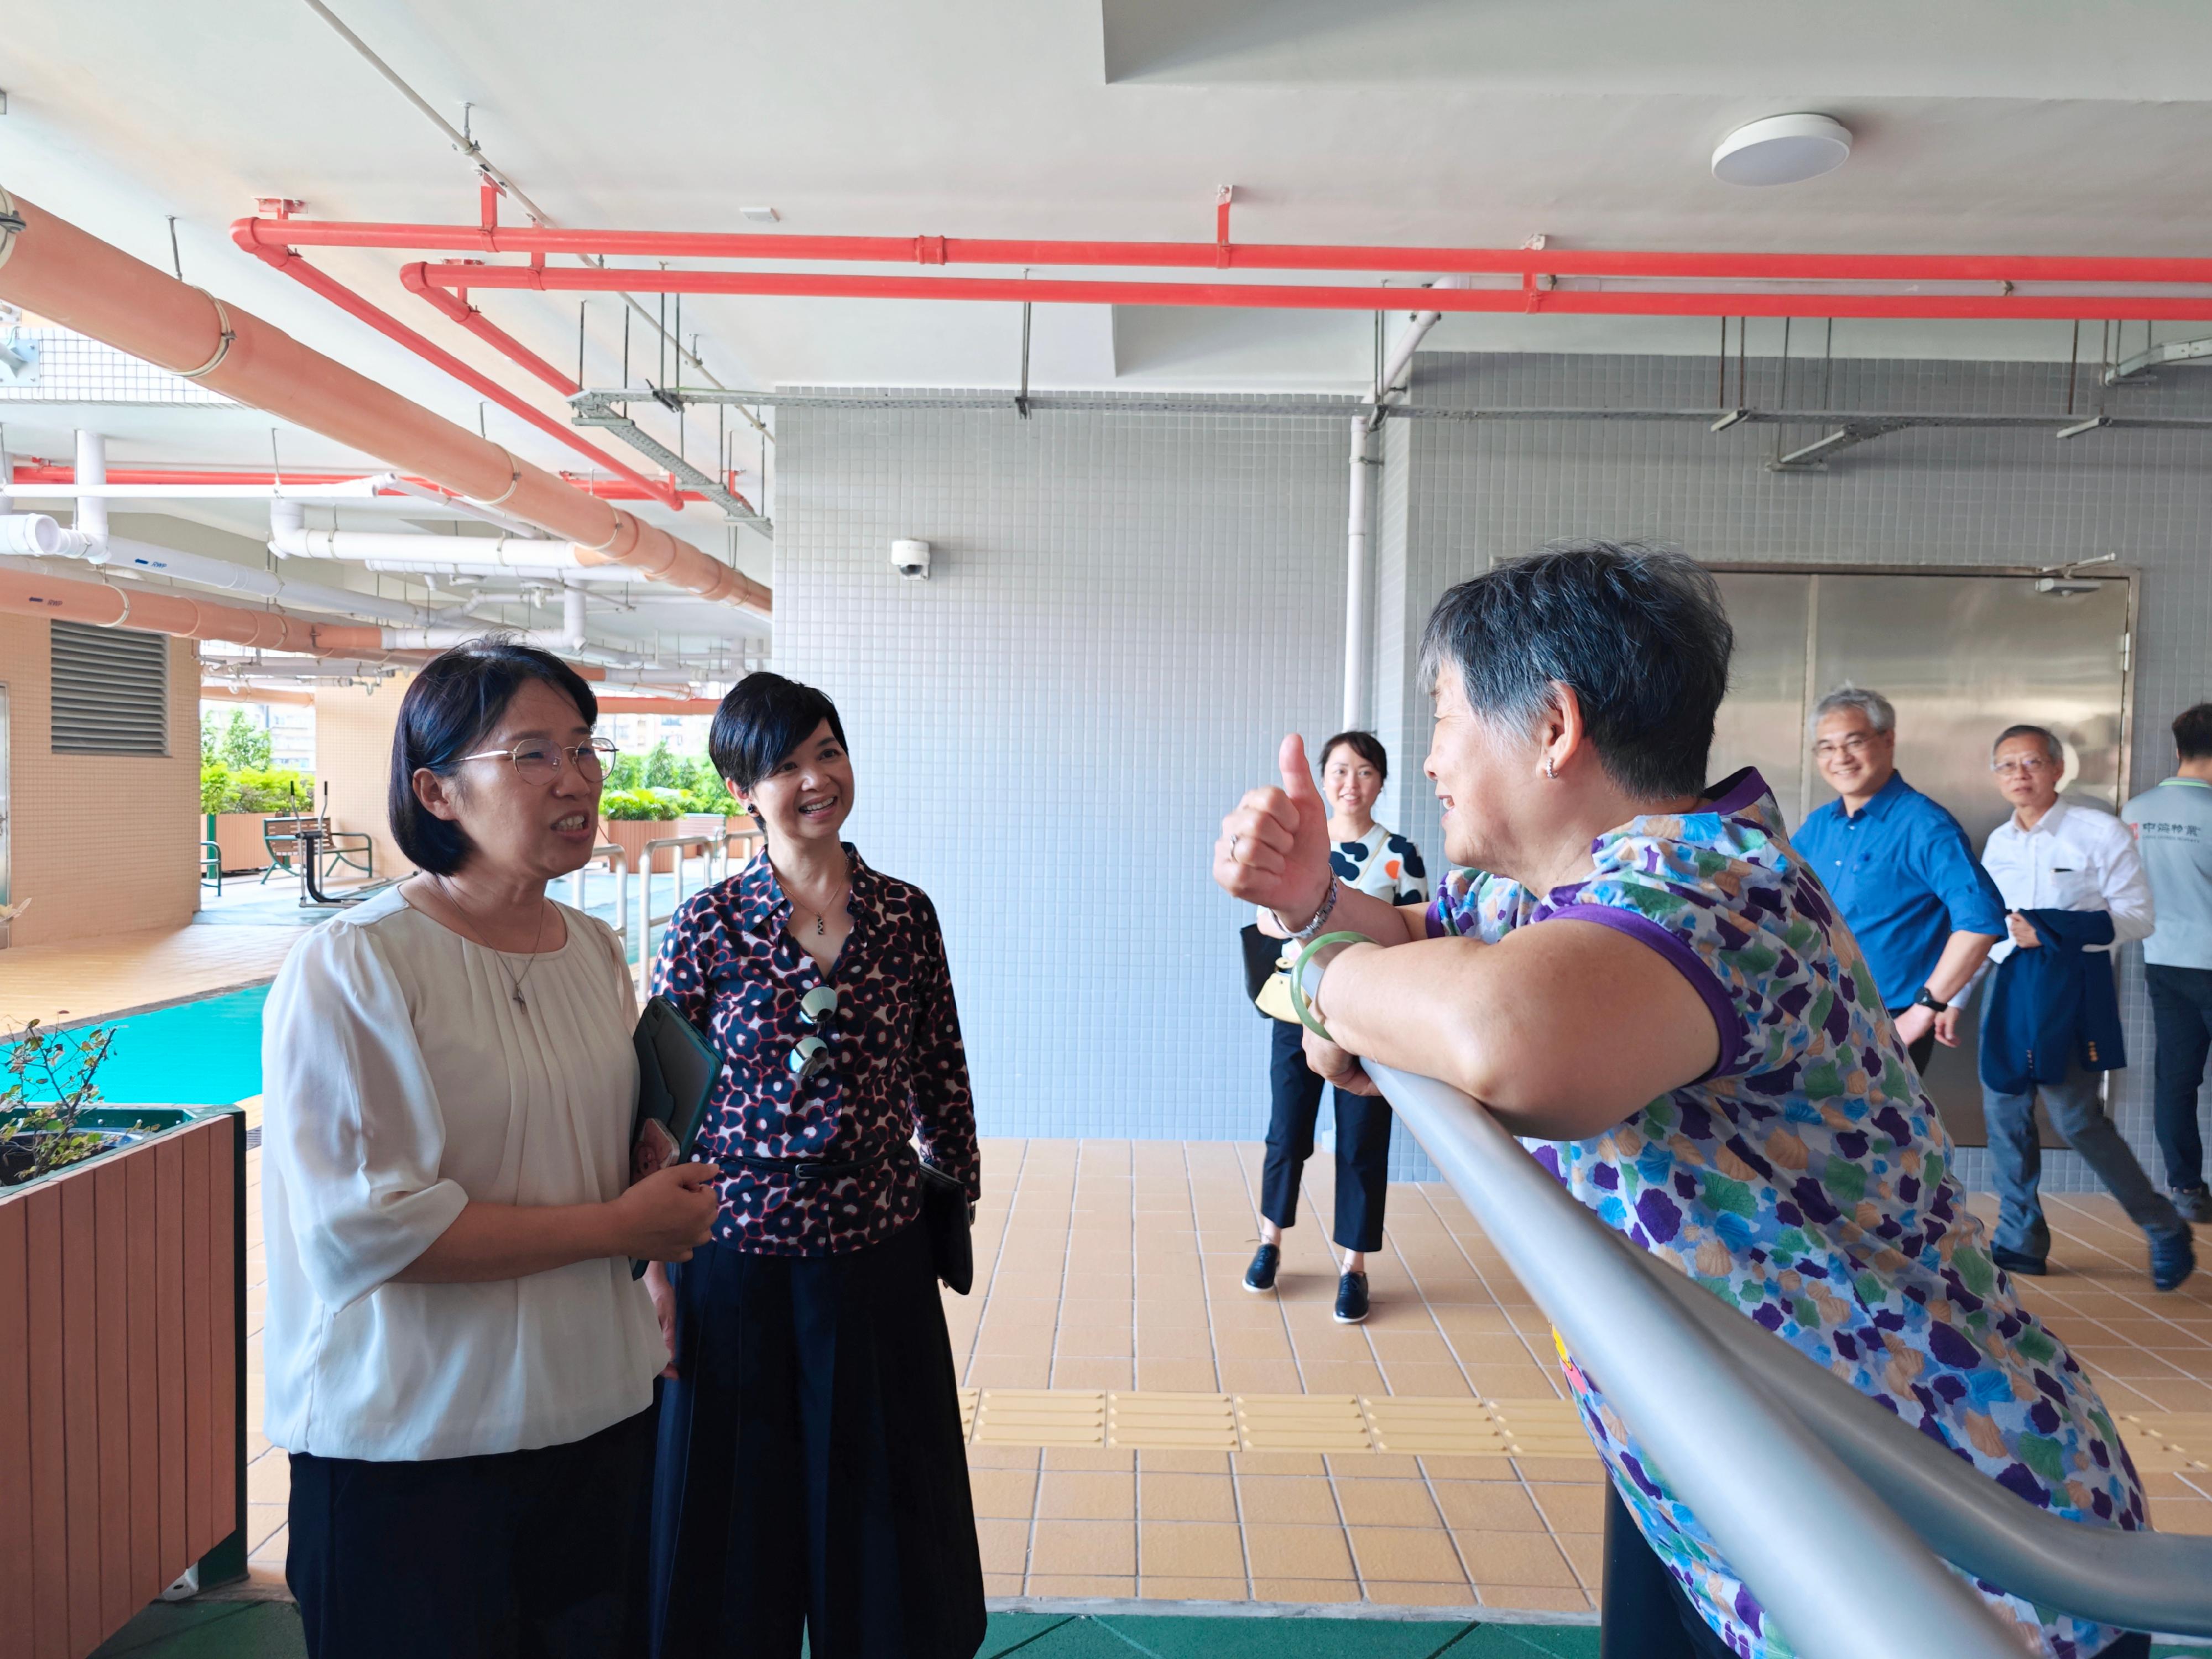 The Secretary for Housing, Ms Winnie Ho, visited Macao today (August 15) to exchange views with government officials of the Macao Special Administrative Region on public housing system and policies, overall planning of Macao and progress of public works projects, as well as inspecting housing and urban development projects in Macao. Photo shows Ms Ho (second right) visiting the Social Housing in Toi San and chatting with a resident.